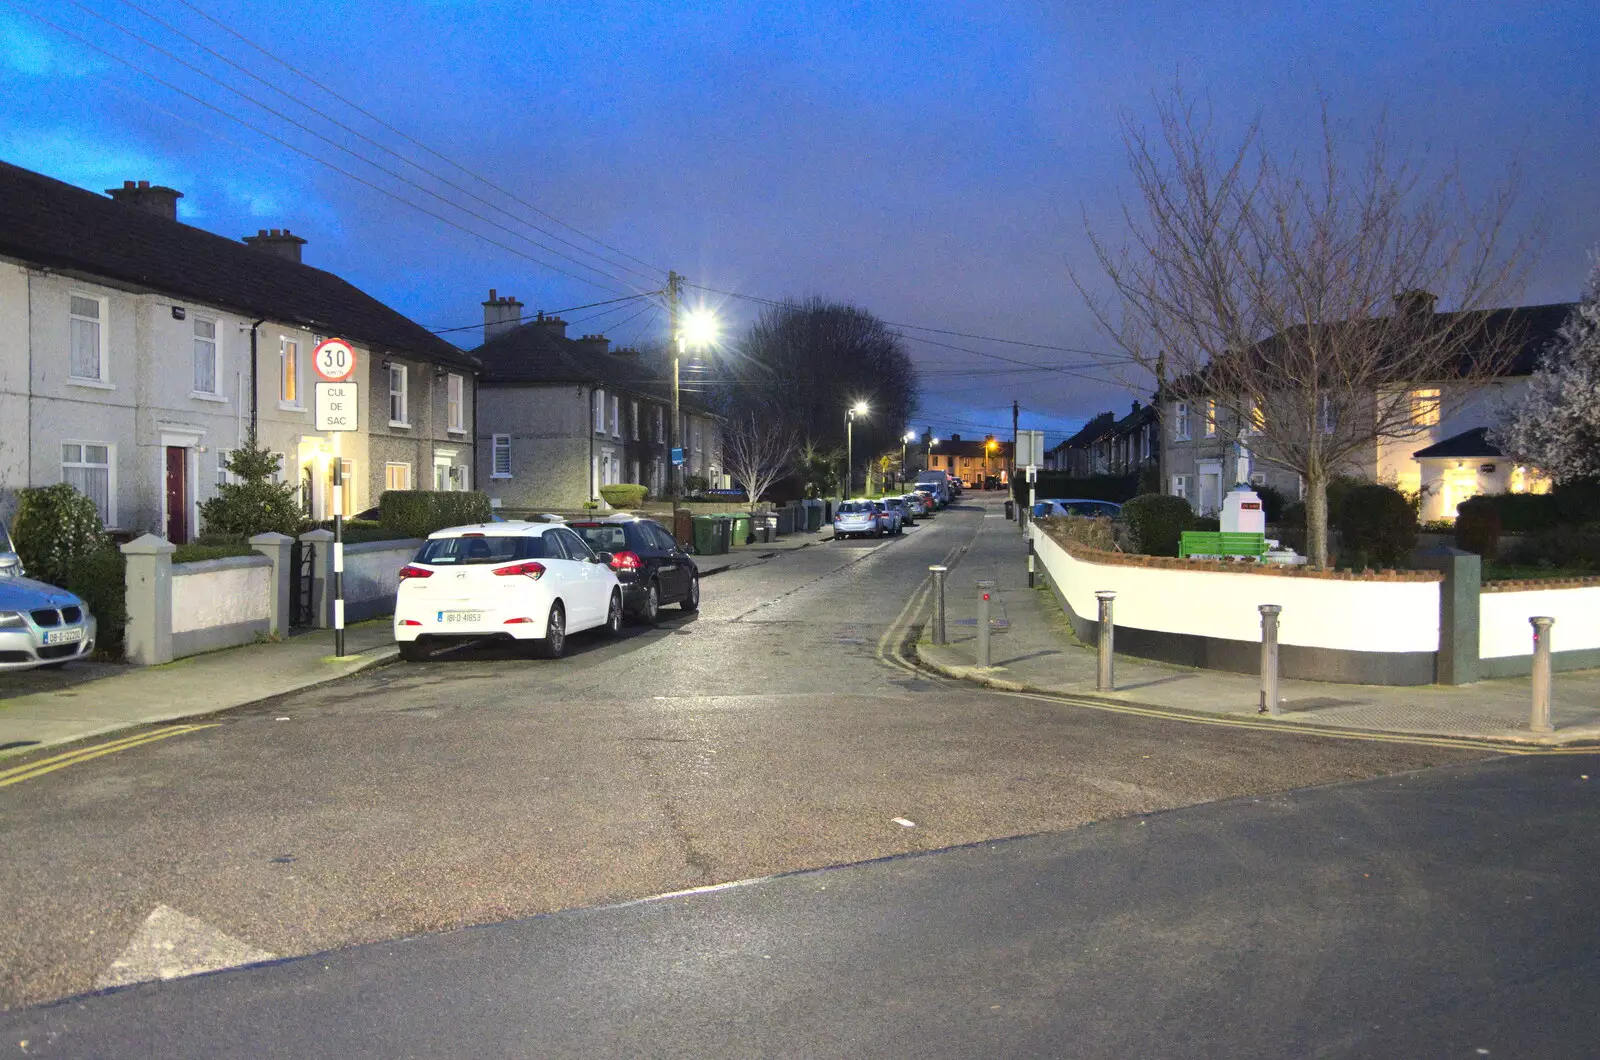 Oliver Plunkett Avenue in Monkstown, from Blackrock North and Newgrange, County Louth, Ireland - 16th February 2023